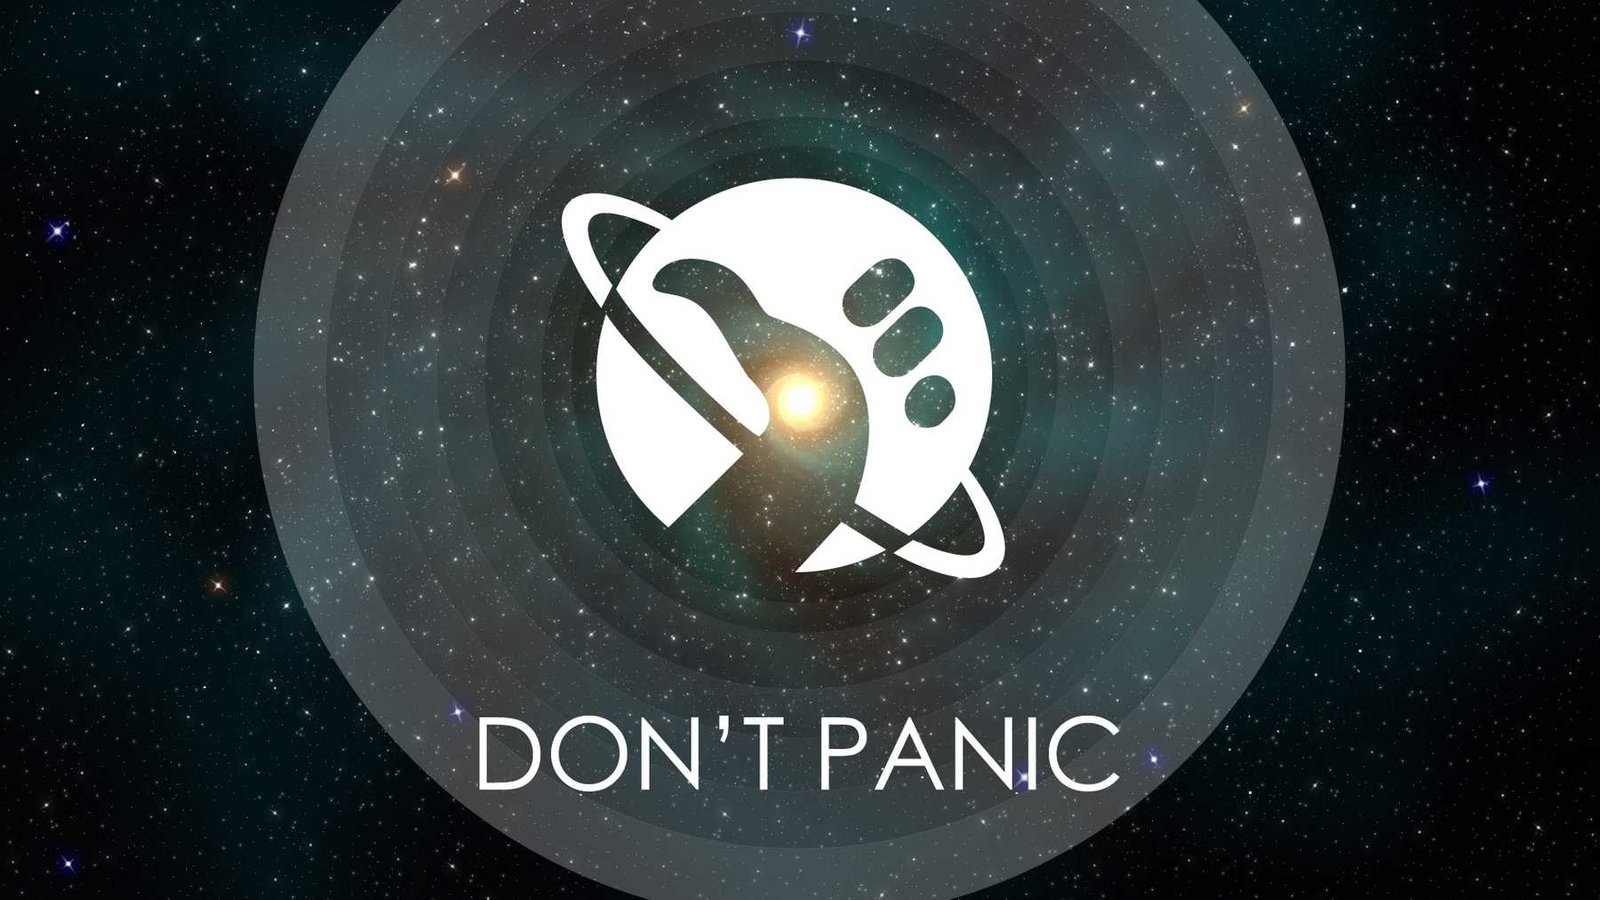 Celebrating Towel Day: The Ideas of Douglas Adams and The Hitchhiker’s Guide to the Galaxy